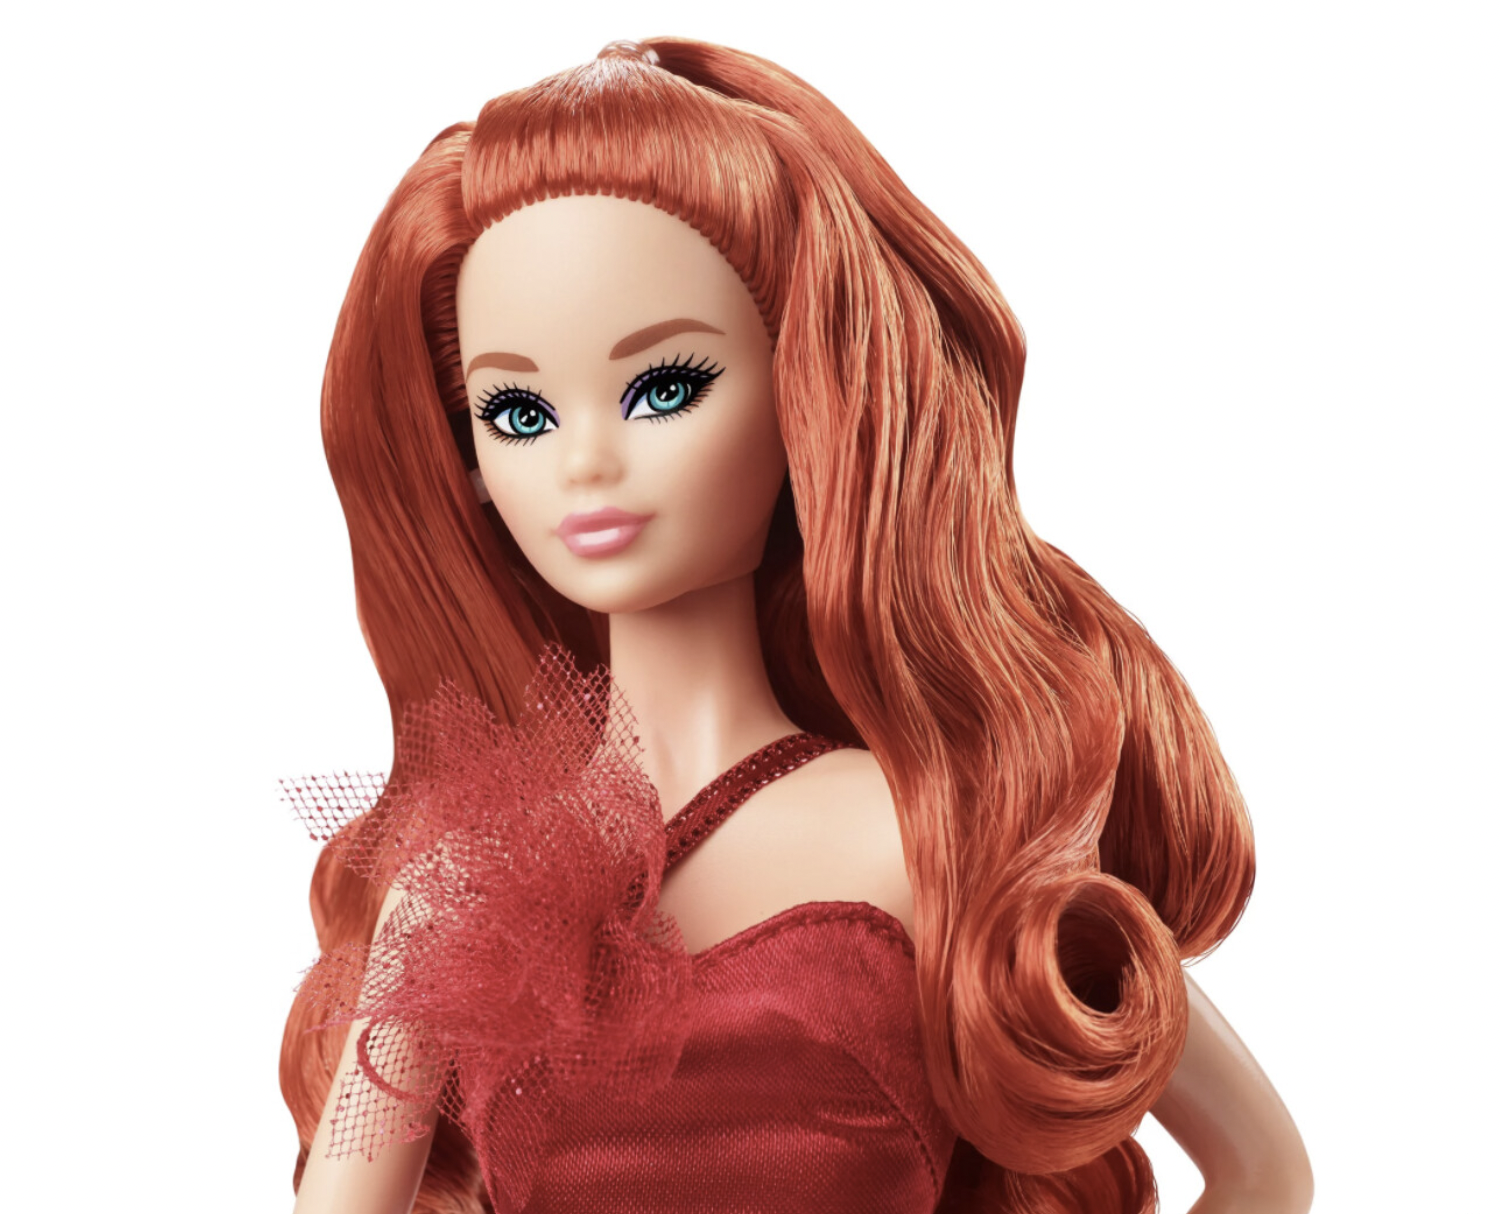 2022 Walmart Exclusive: Holiday Barbie (Red Hair)